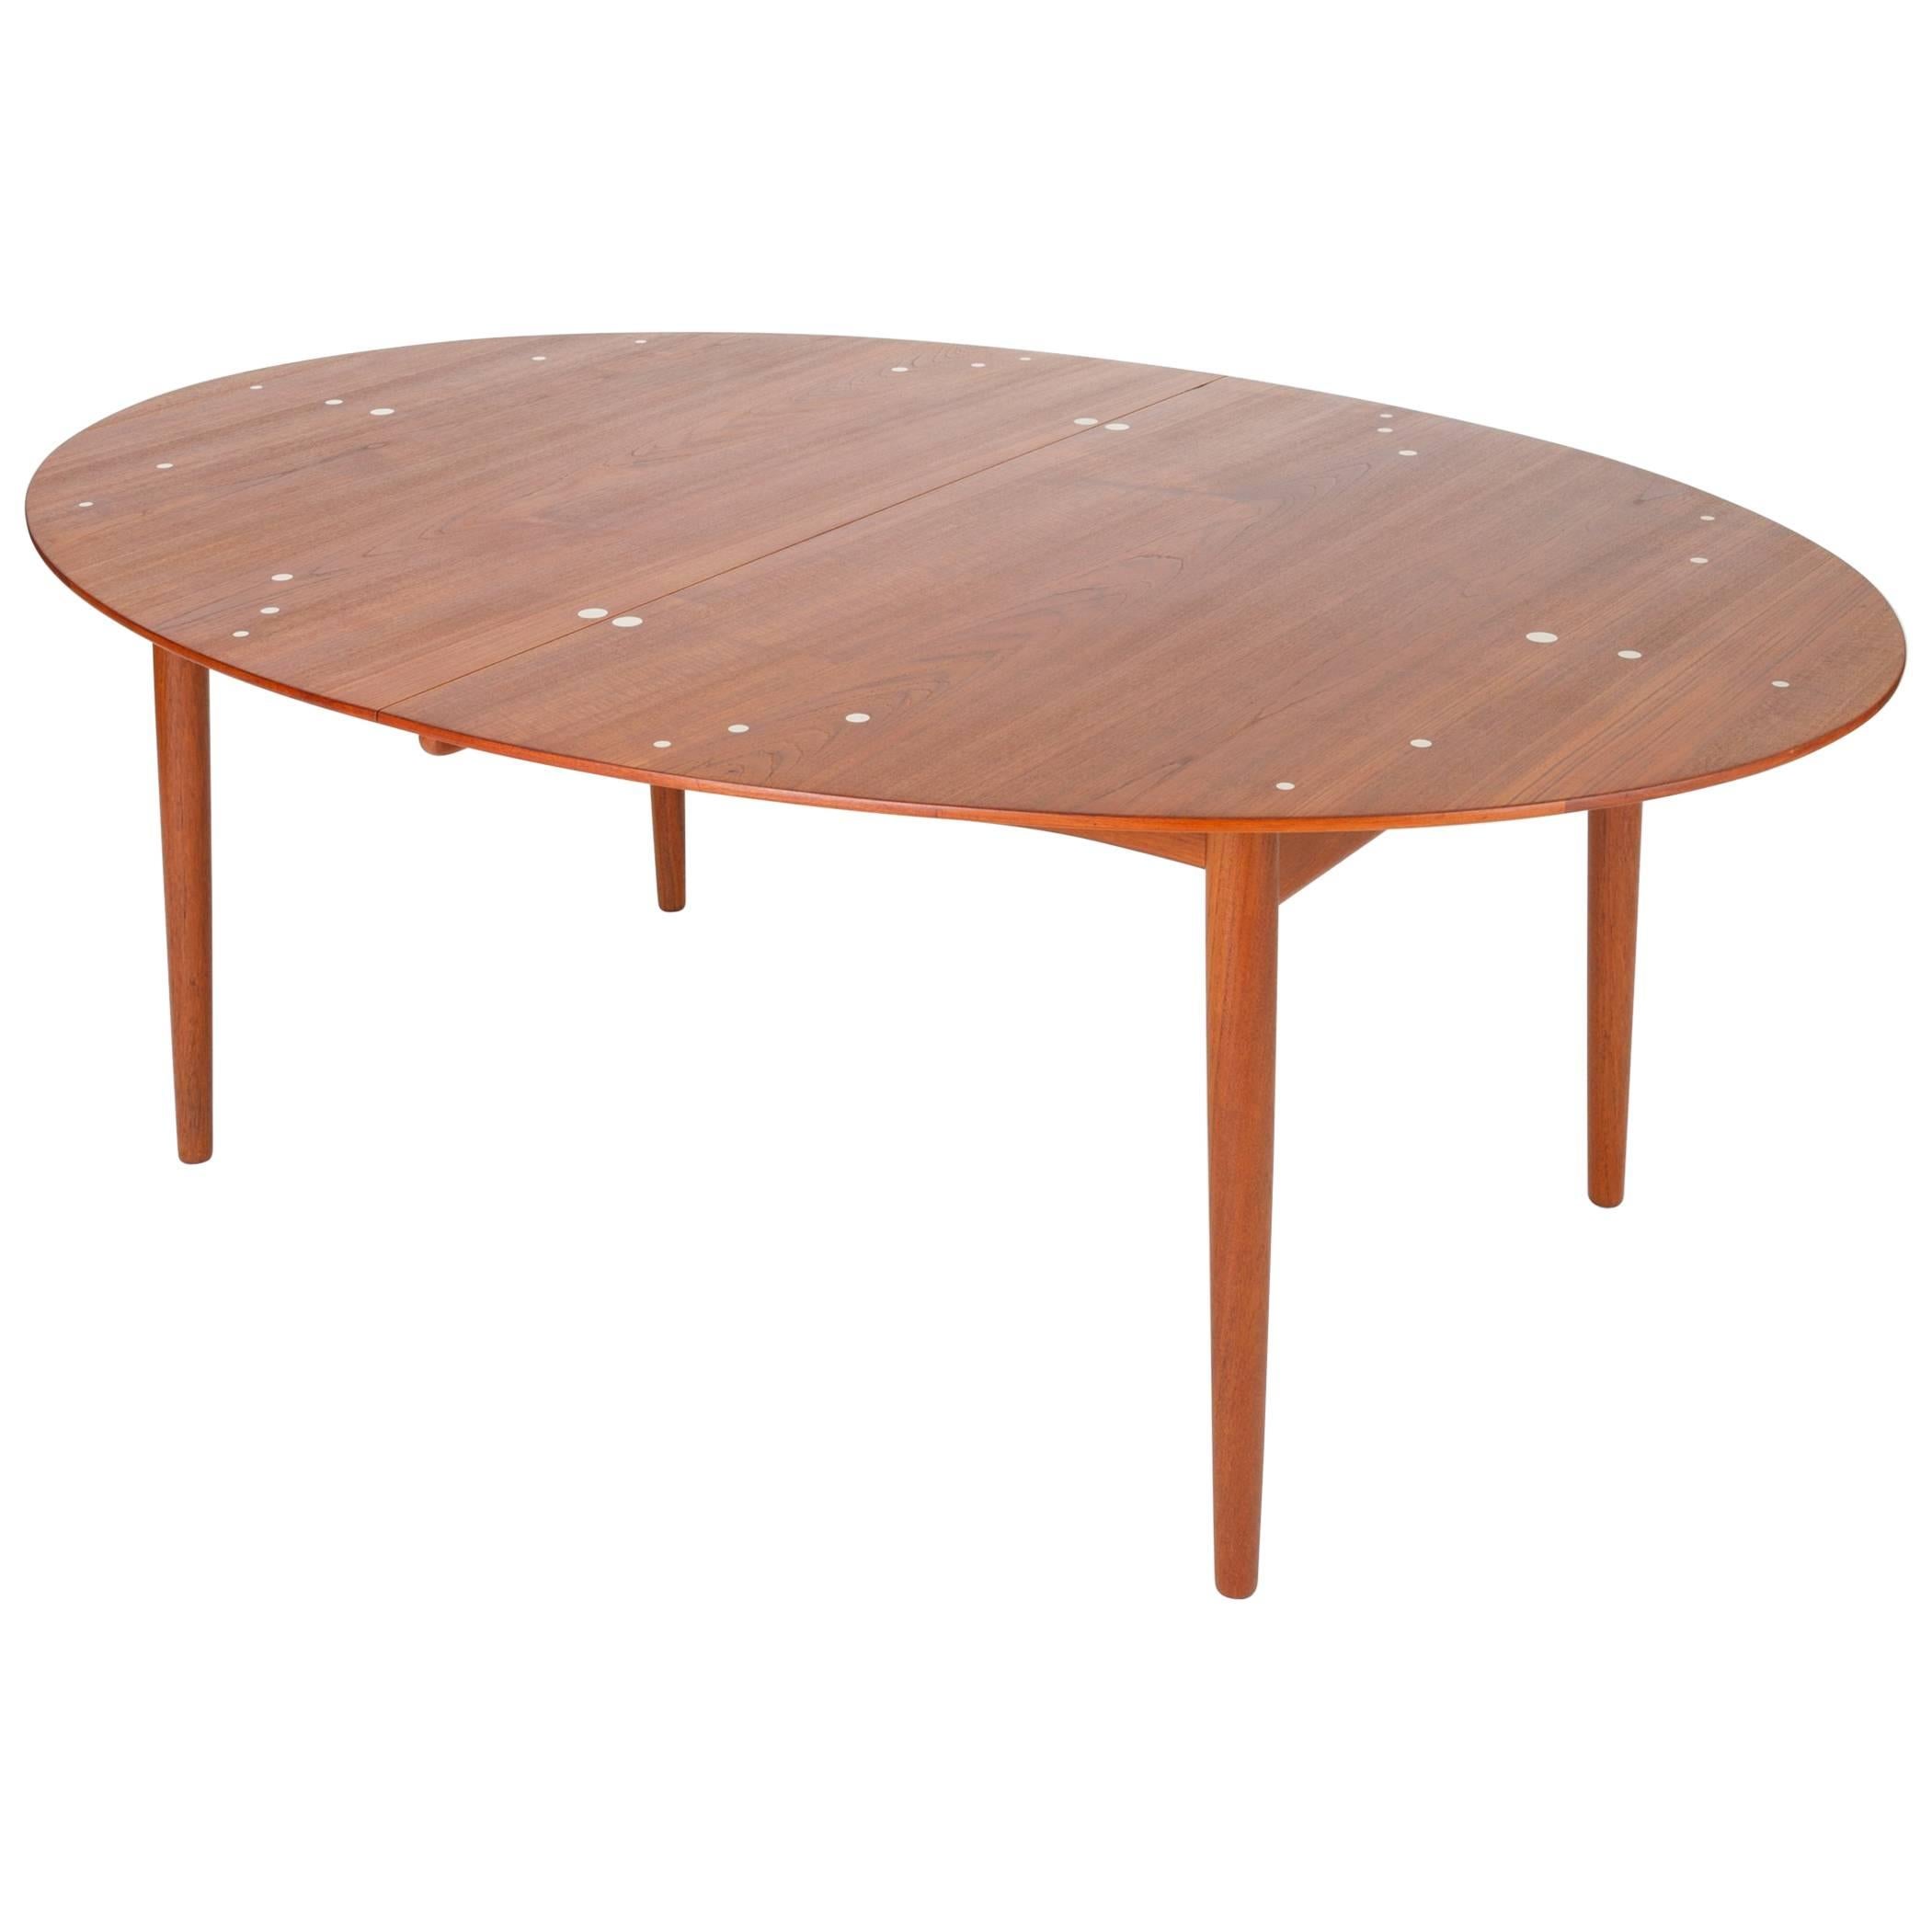 "Judas" Dining Table in Teak with Sterling Silver Inlay by Finn Juhl